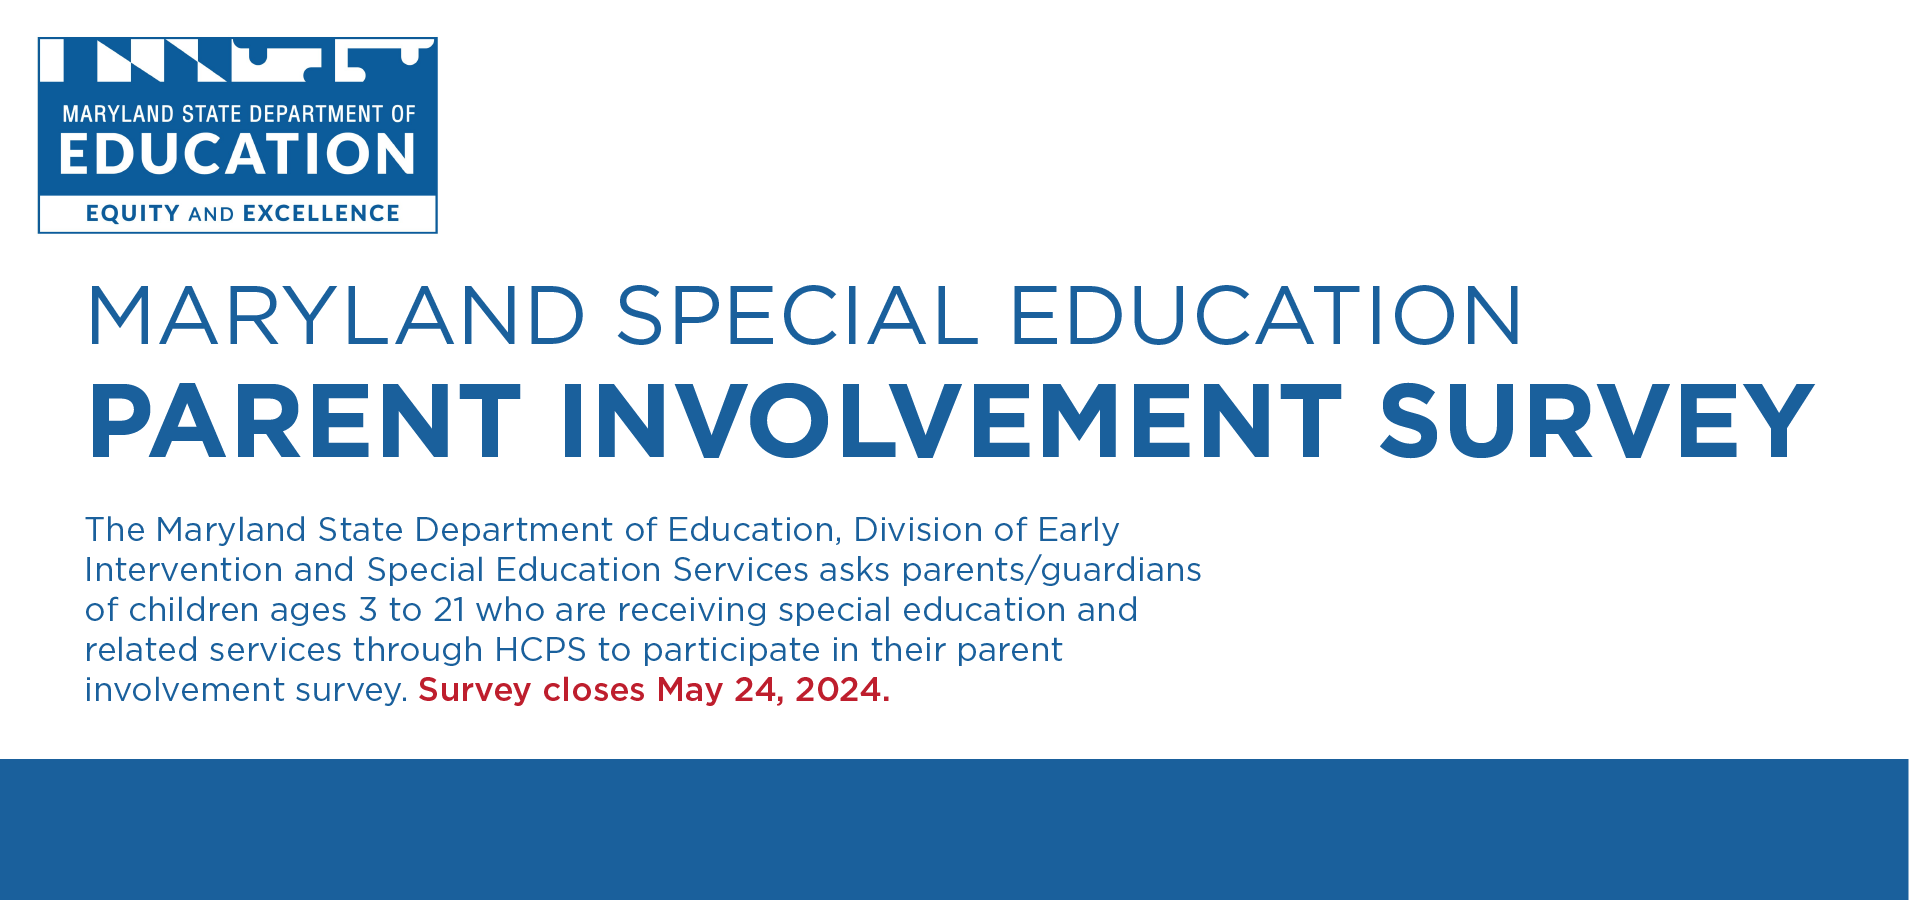 Maryland Special Education Parent Involvement Survey available through Friday, May 24, 2024.